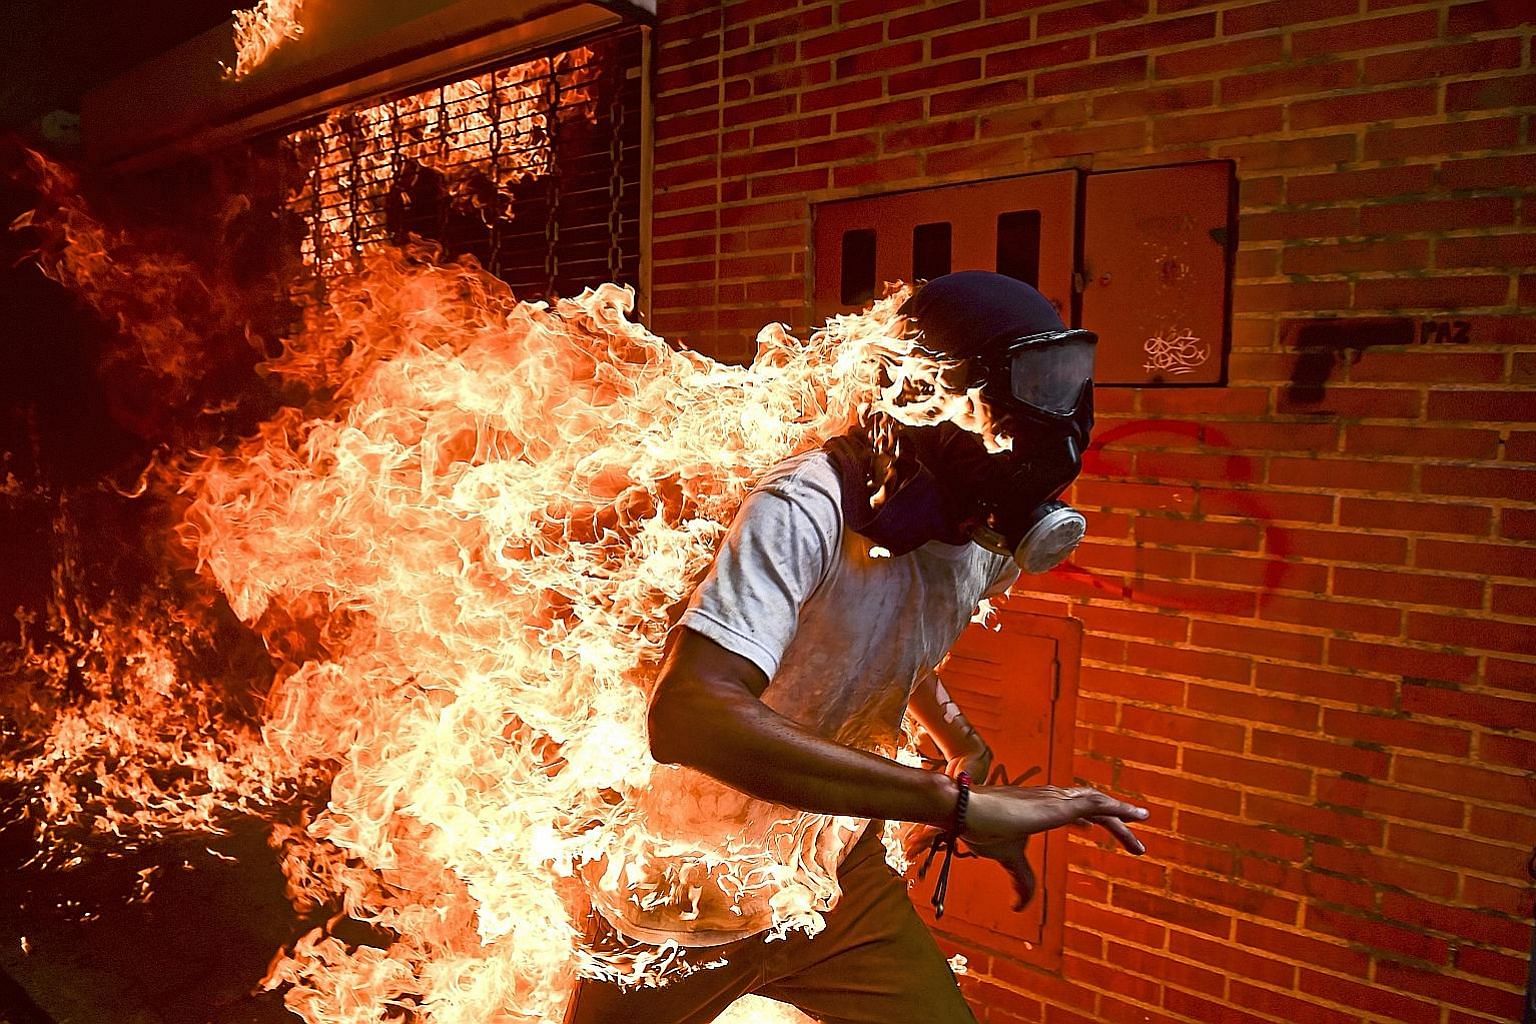 Protester Jose Victor Salazar Balza on fire amid violent clashes with riot police in Caracas, Venezuela, in May last year. The image, taken by Venezuelan photographer Ronaldo Schemidt, was named World Press Photo of the Year.